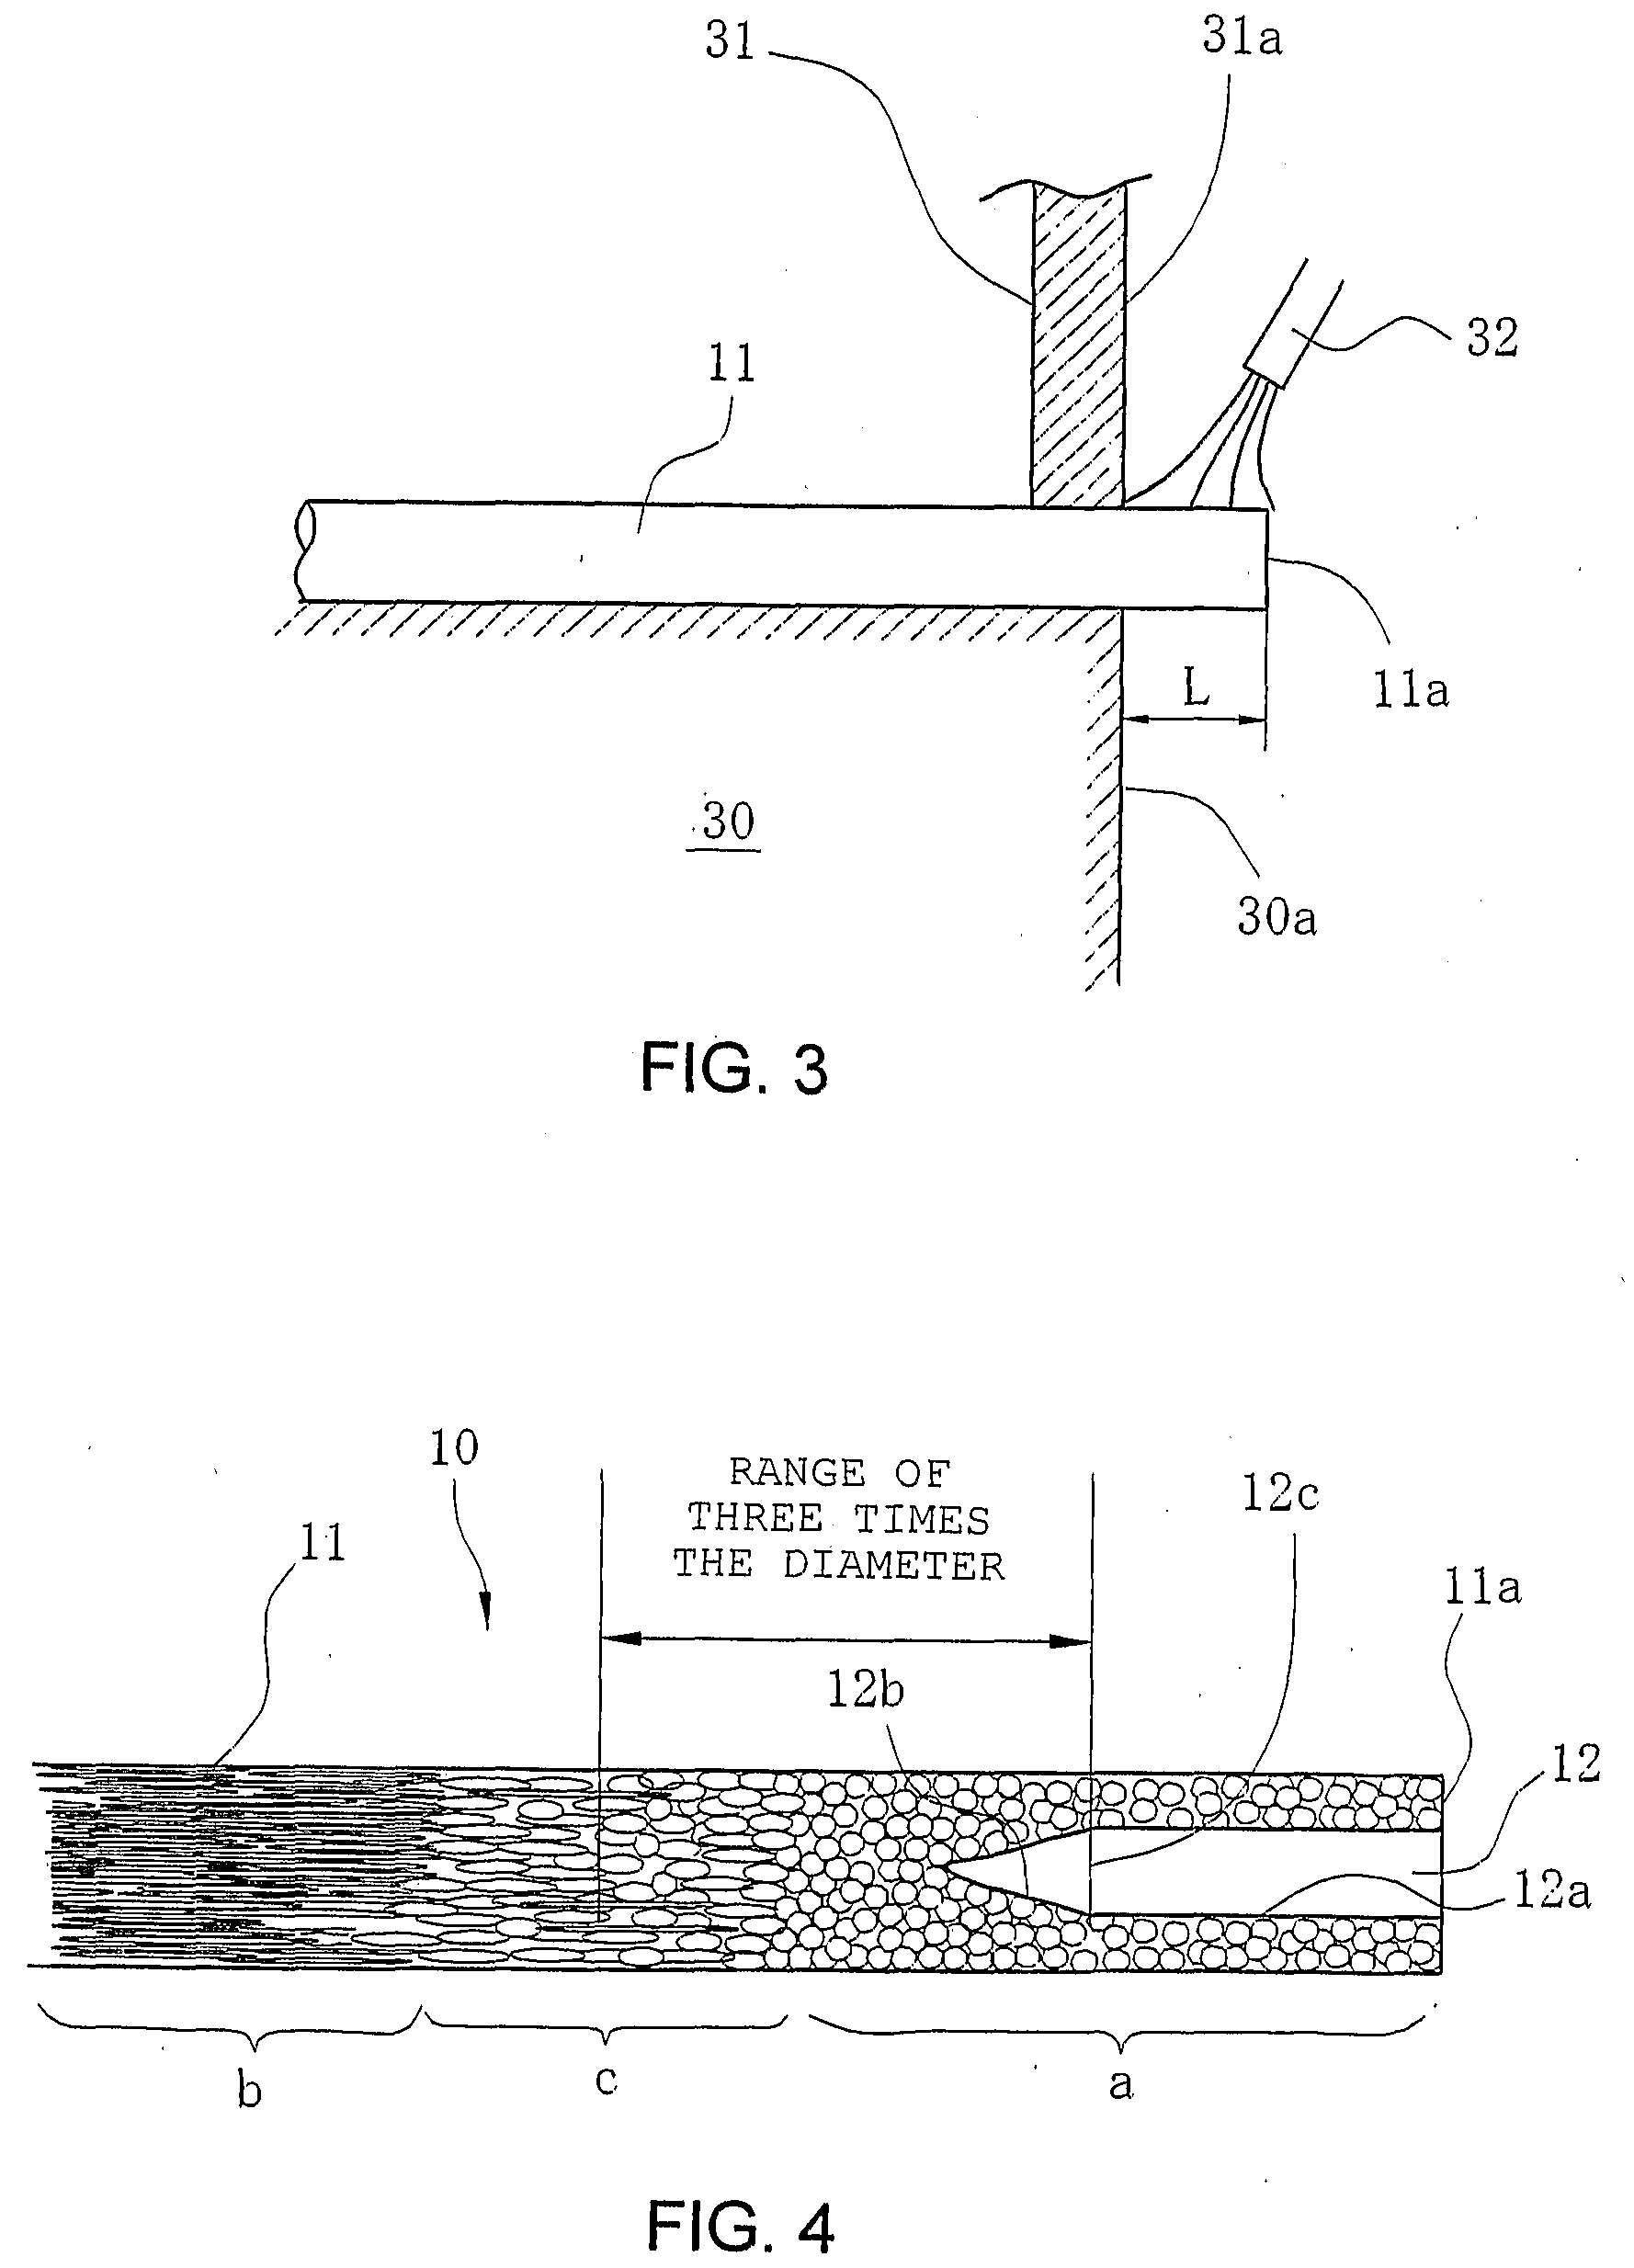 Eyeless Sewing Needle and Fabrication Method for the Same